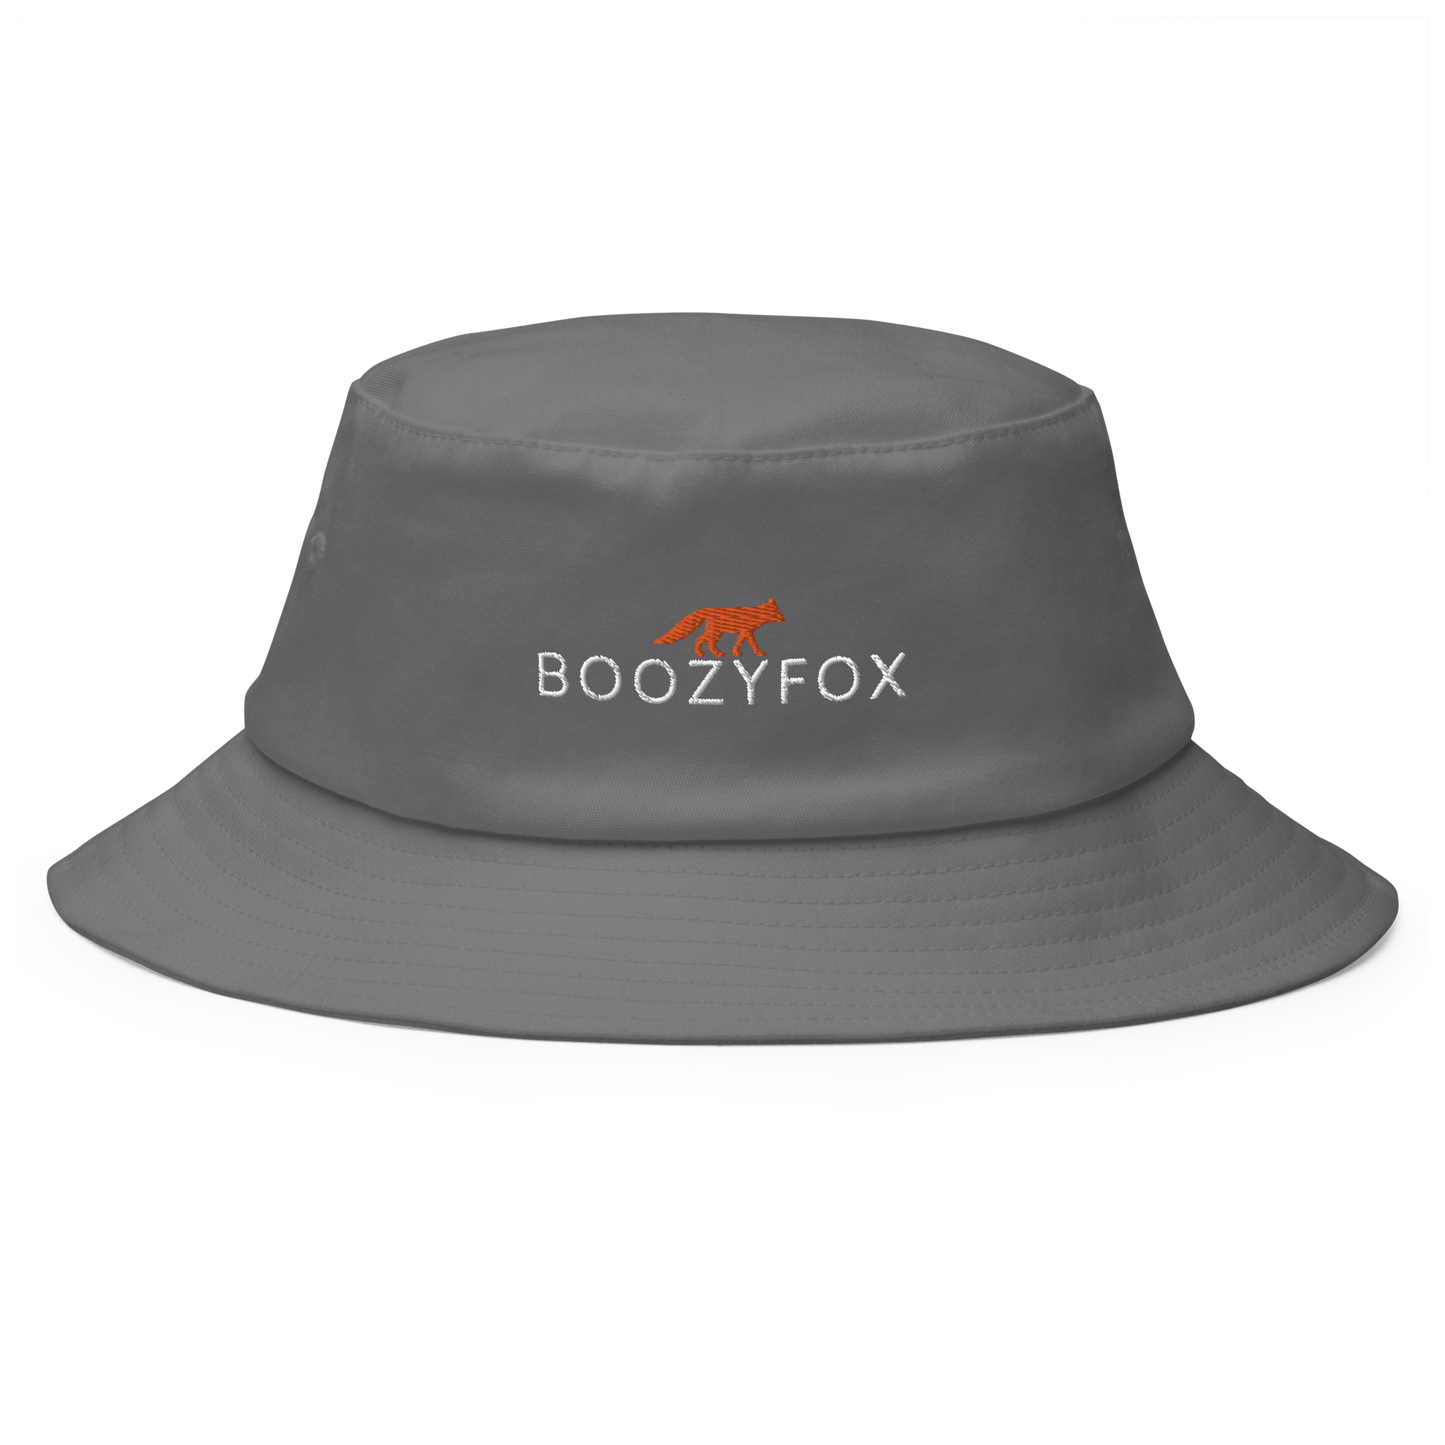 Cool Grey Bucket Hat featuring a striking embroidered Boozy Fox logo on front. Shop Cool Sun Protection Bucket Hats And Wide Brim Hats Online - Boozy Fox